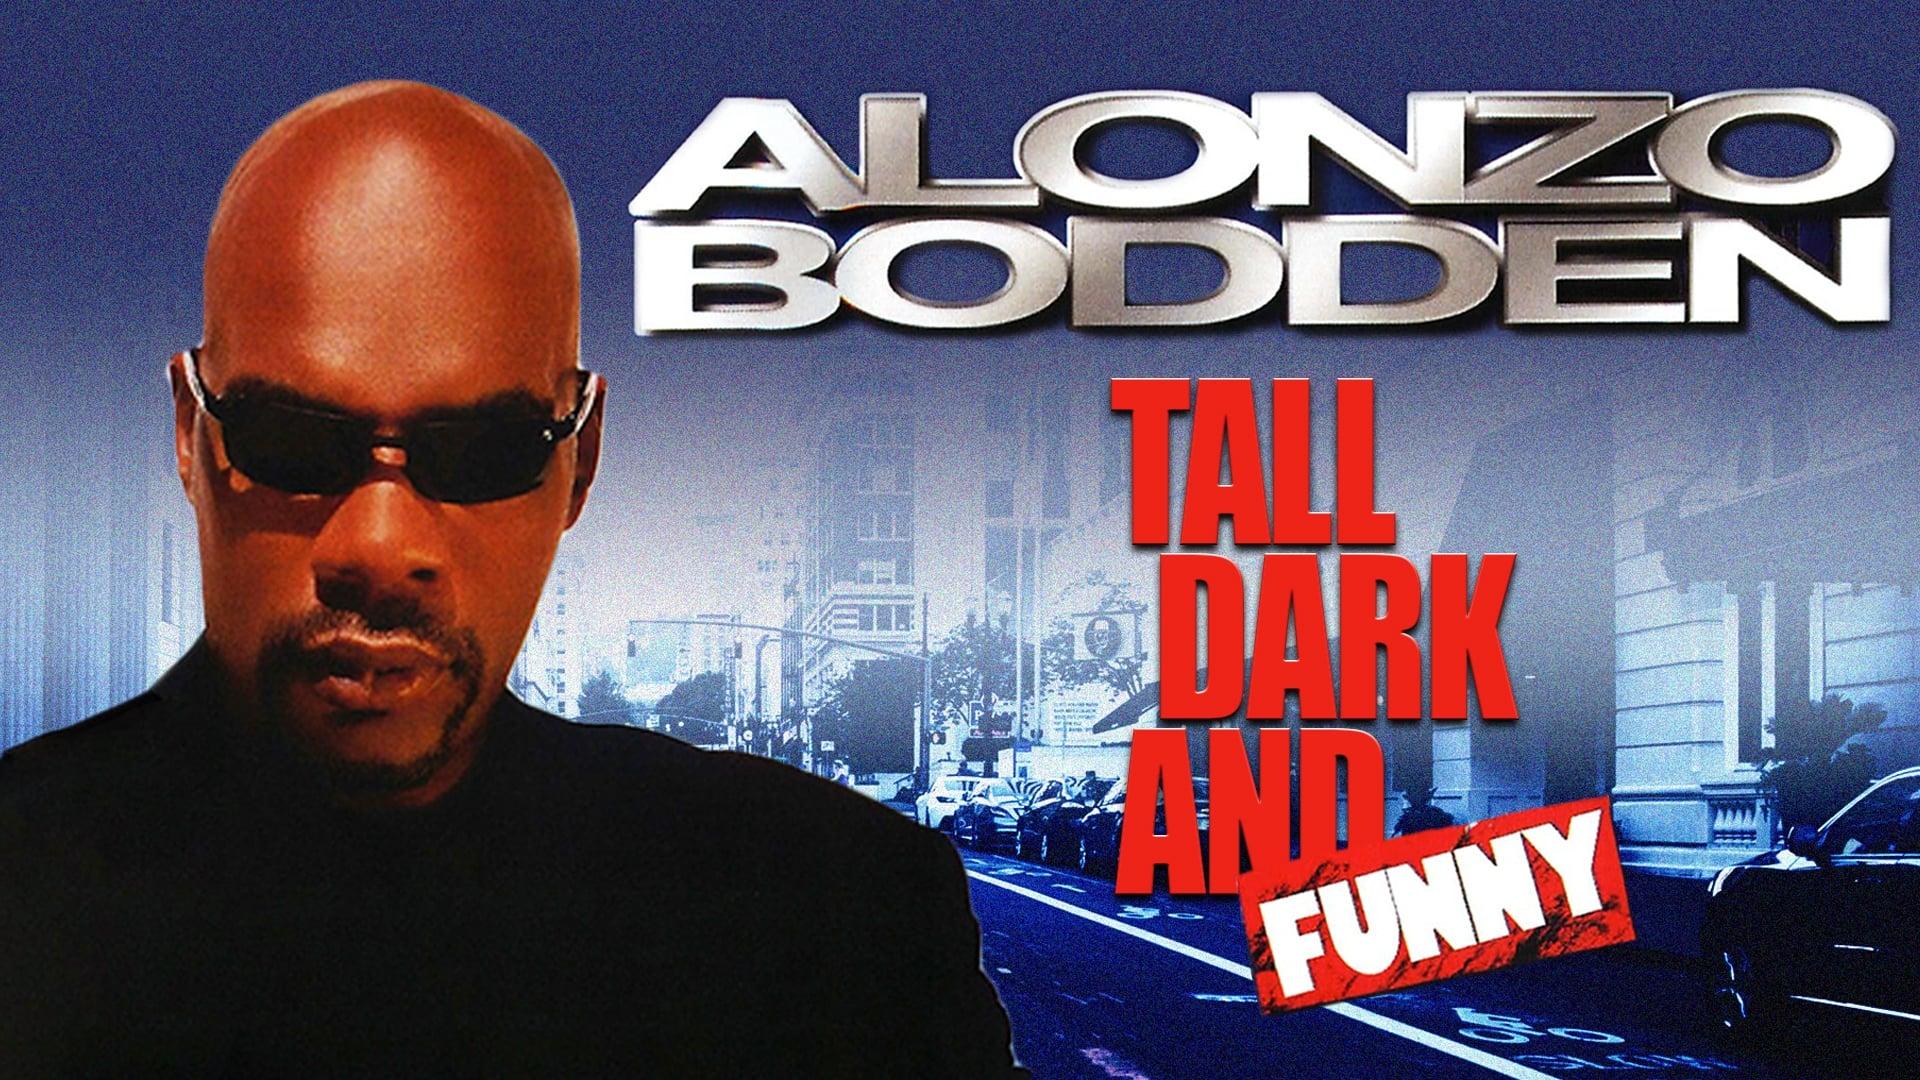 Alonzo Bodden: Tall, Dark and Funny backdrop